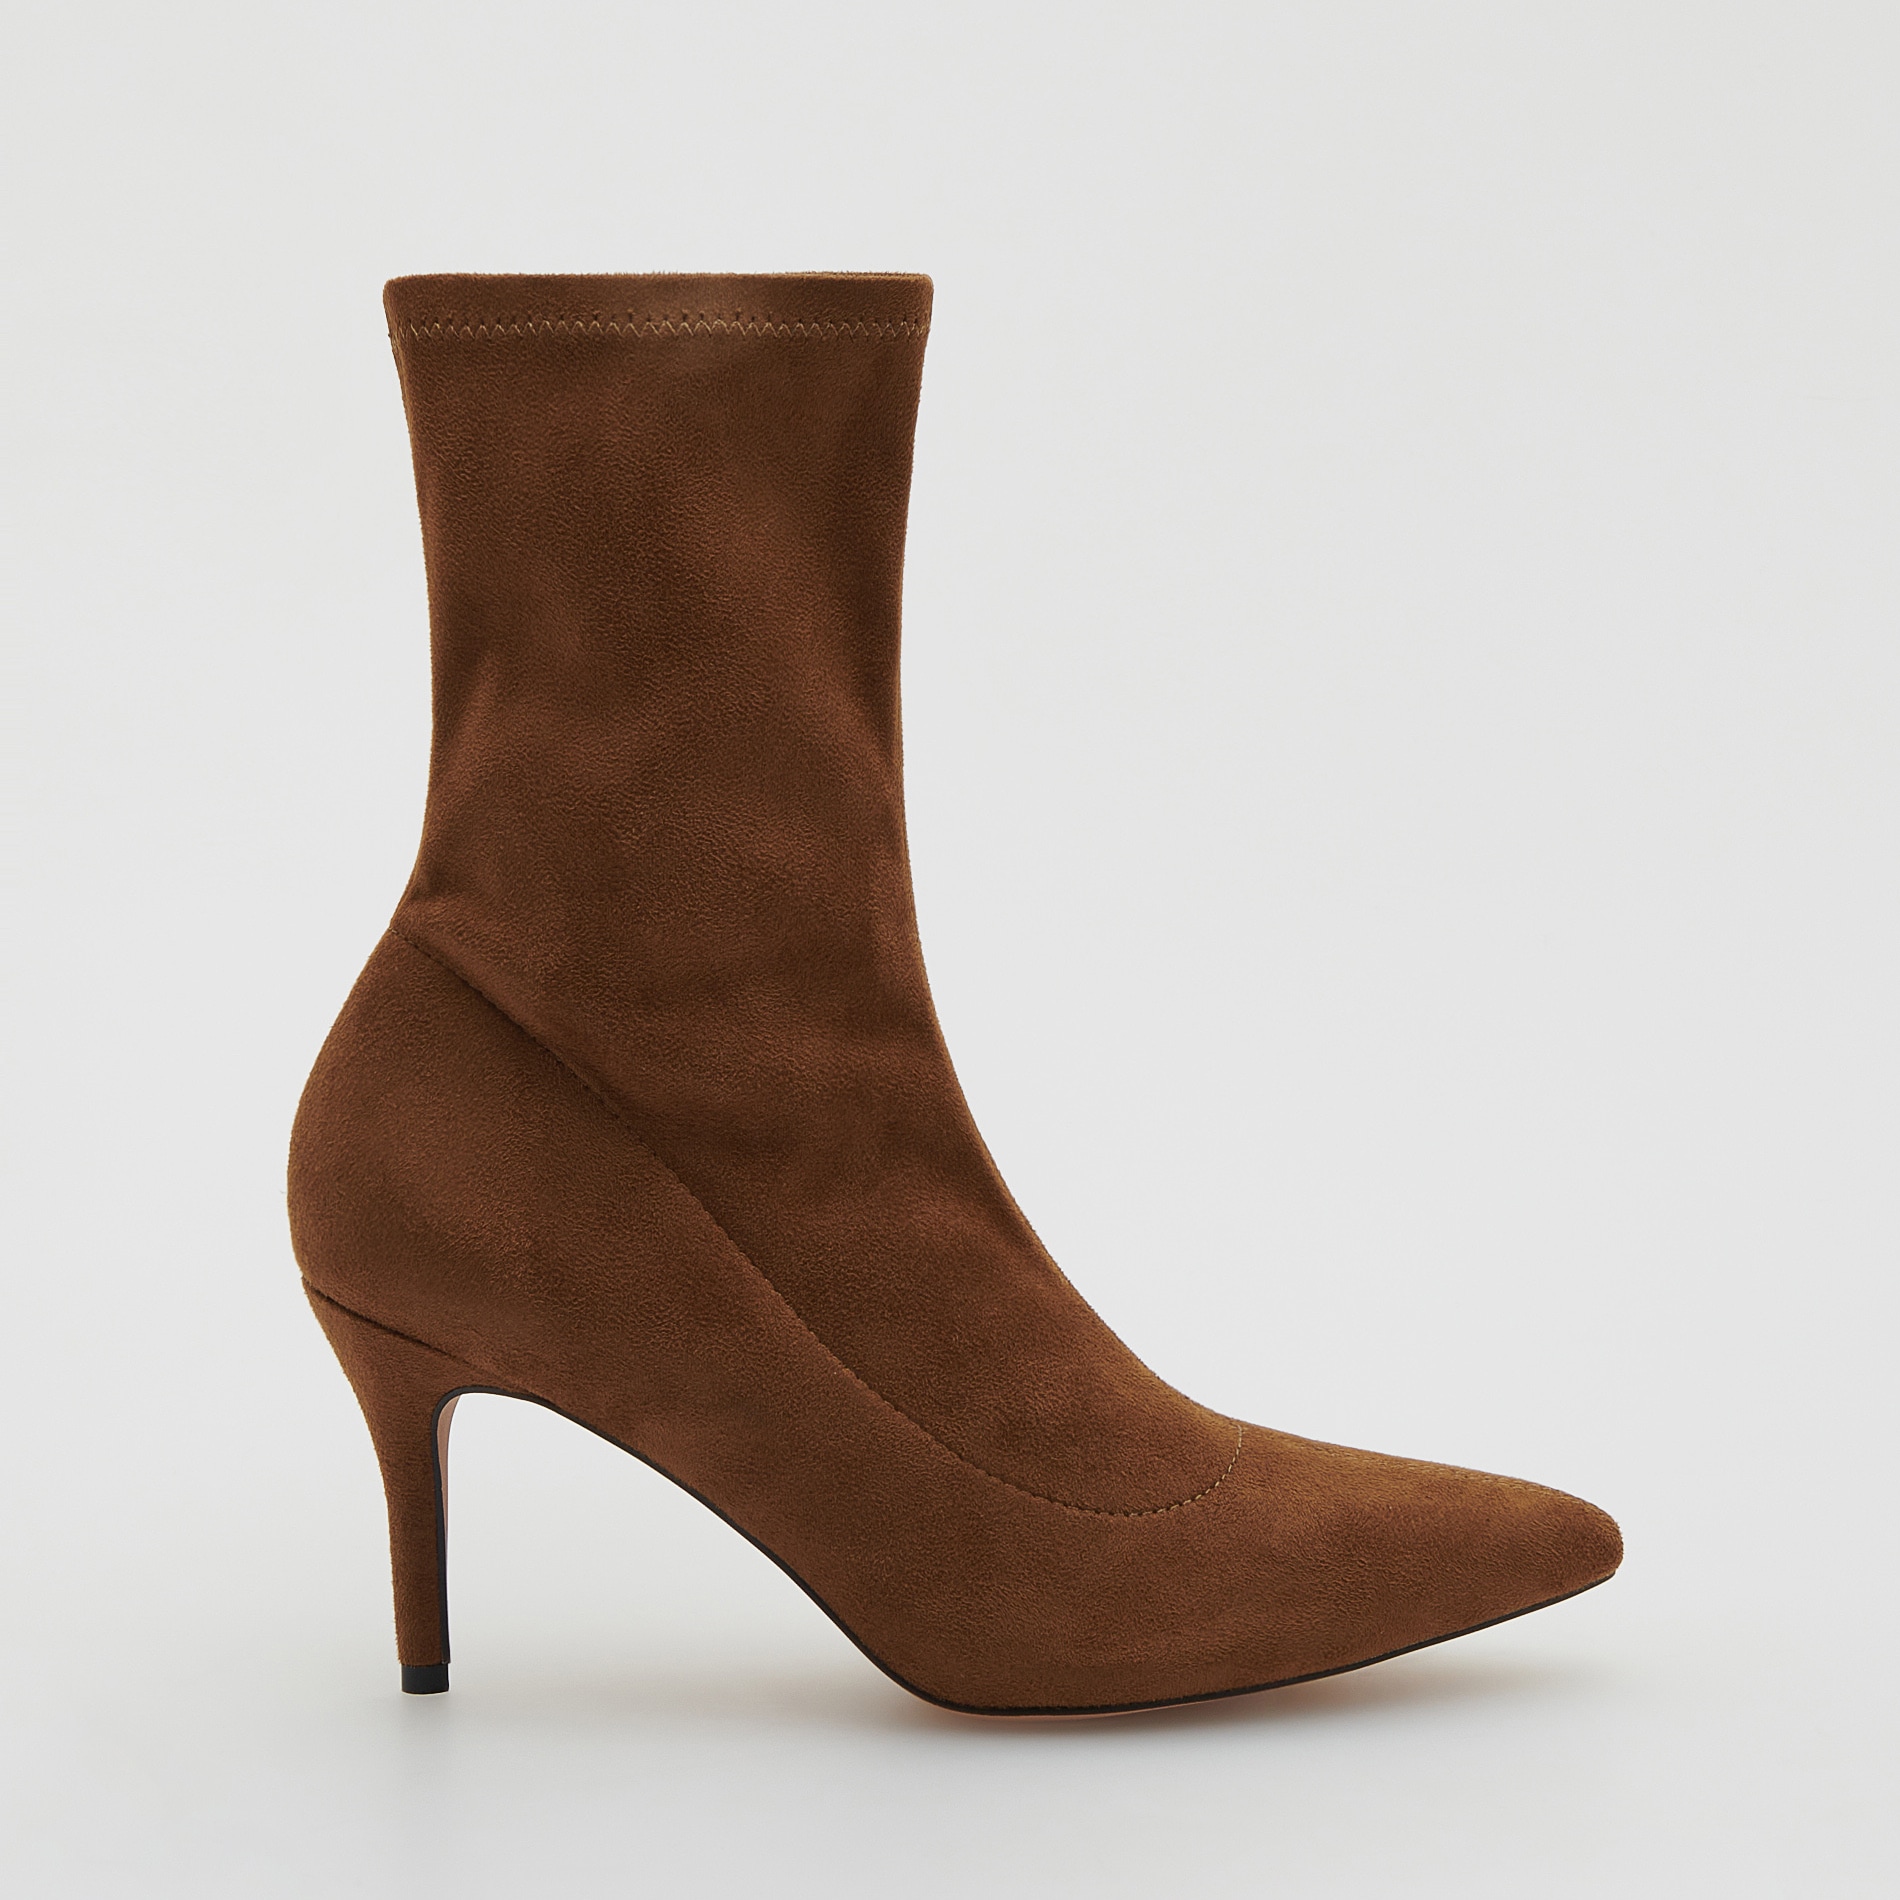 Reserved – Ladies` ankle boots – Maro Accessories imagine noua gjx.ro